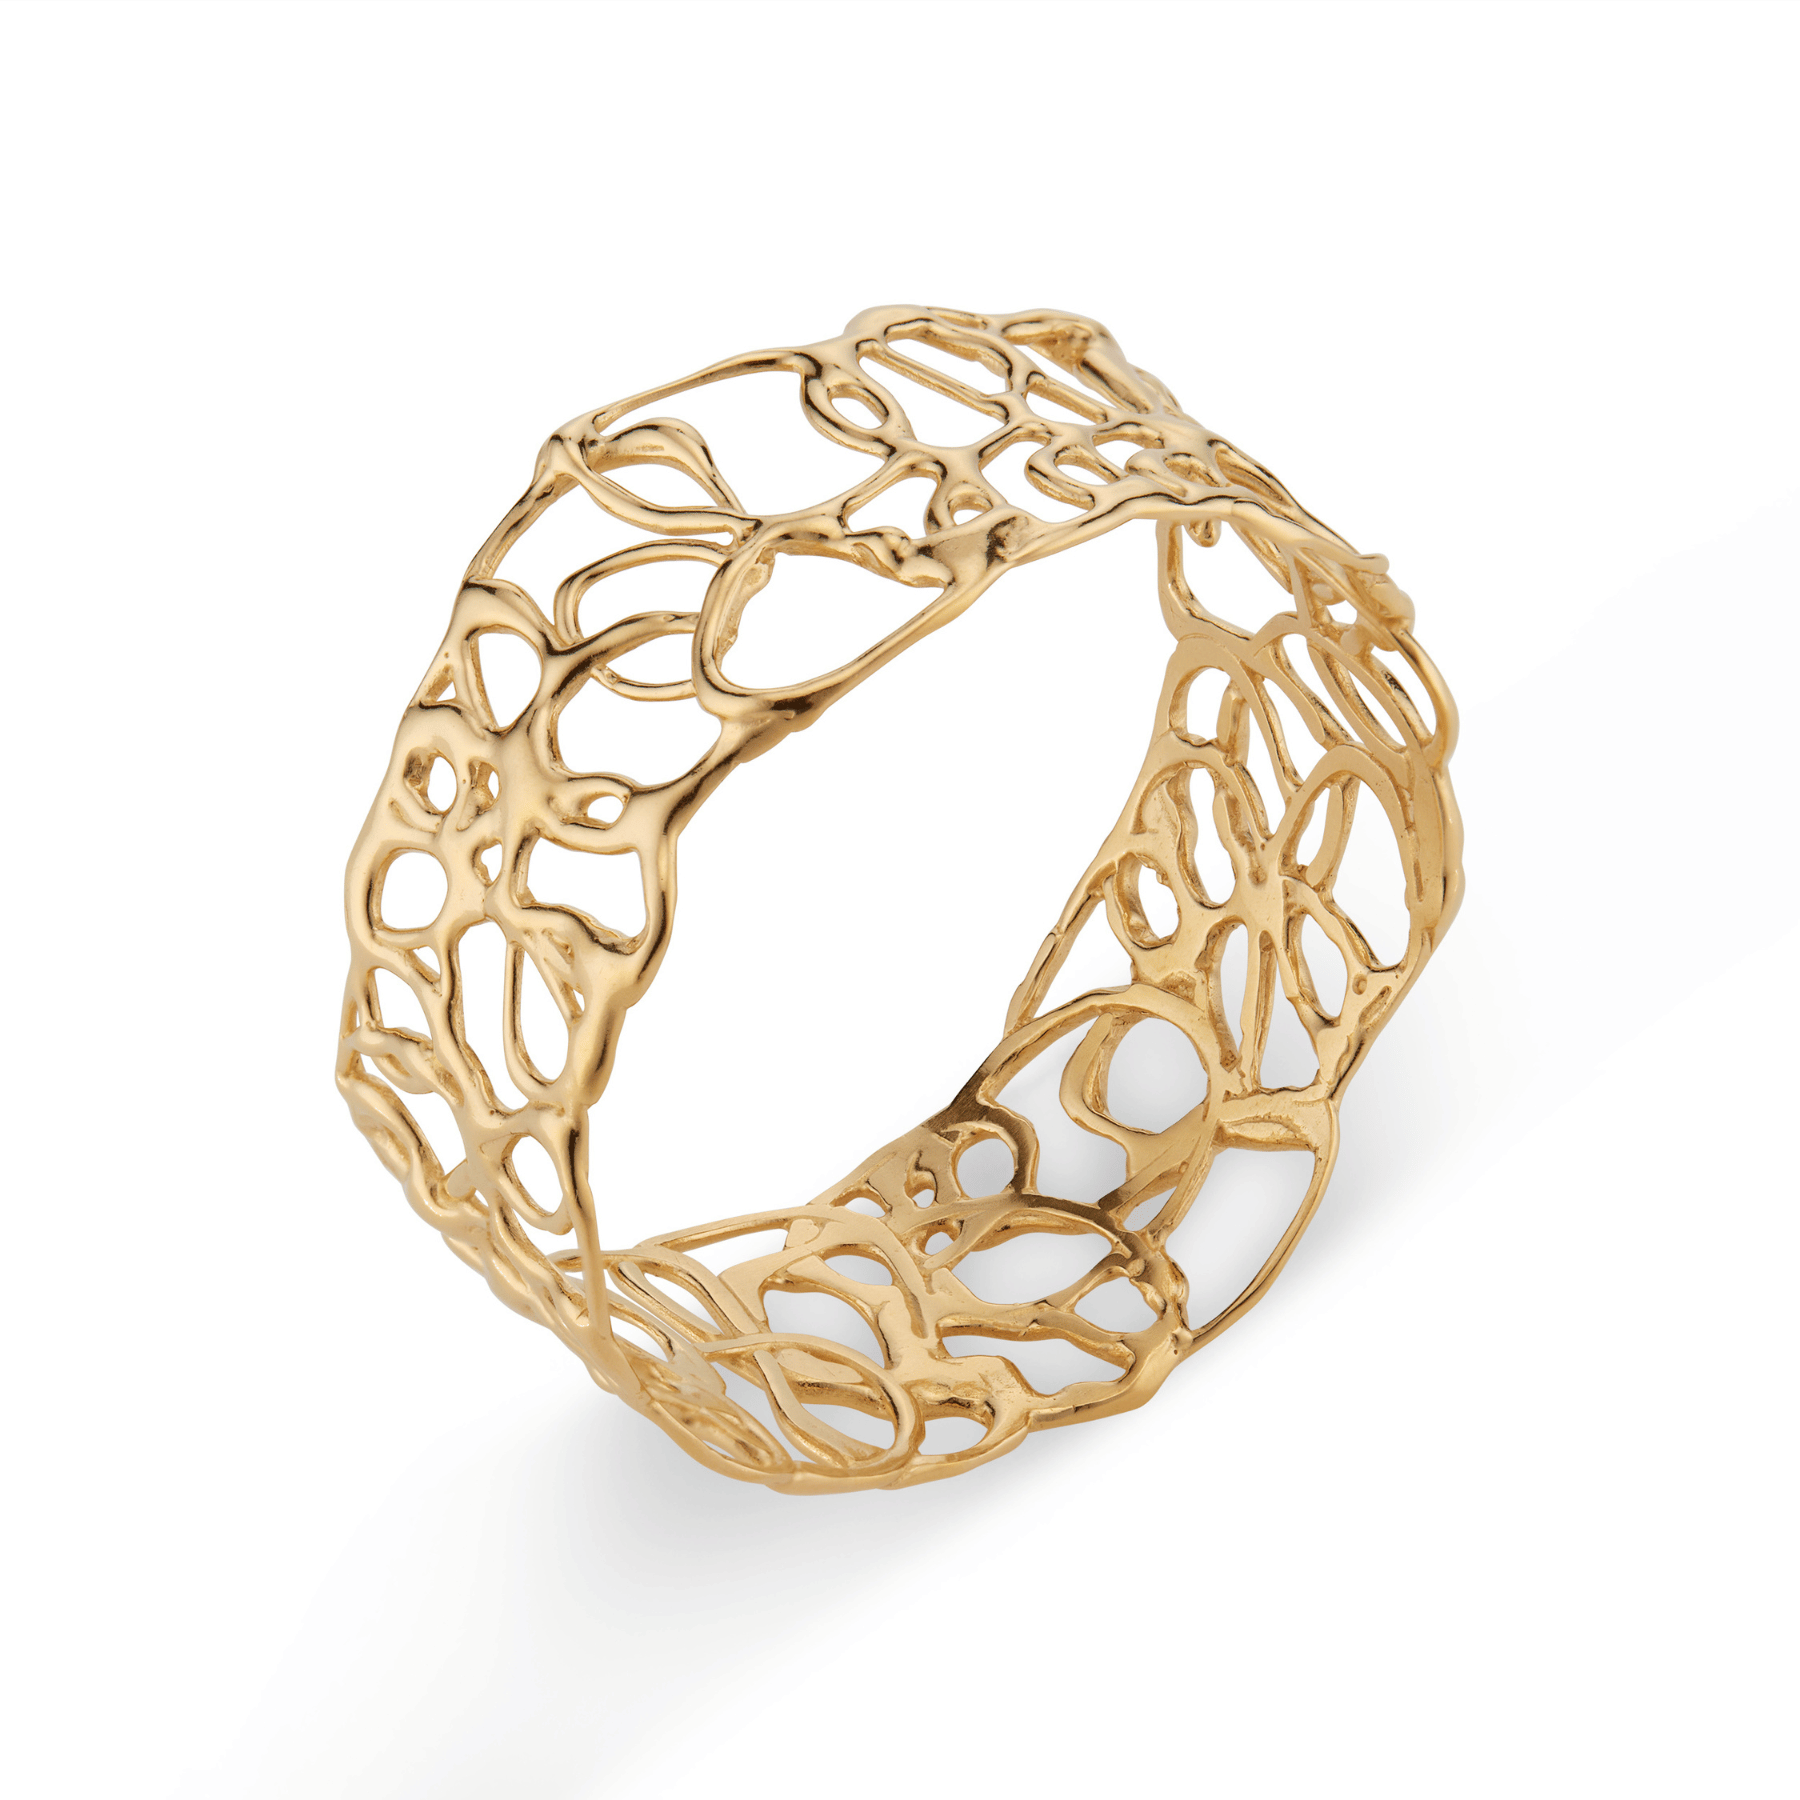 Abstract, squiggle slip on bangle in 18k gold vermeil.